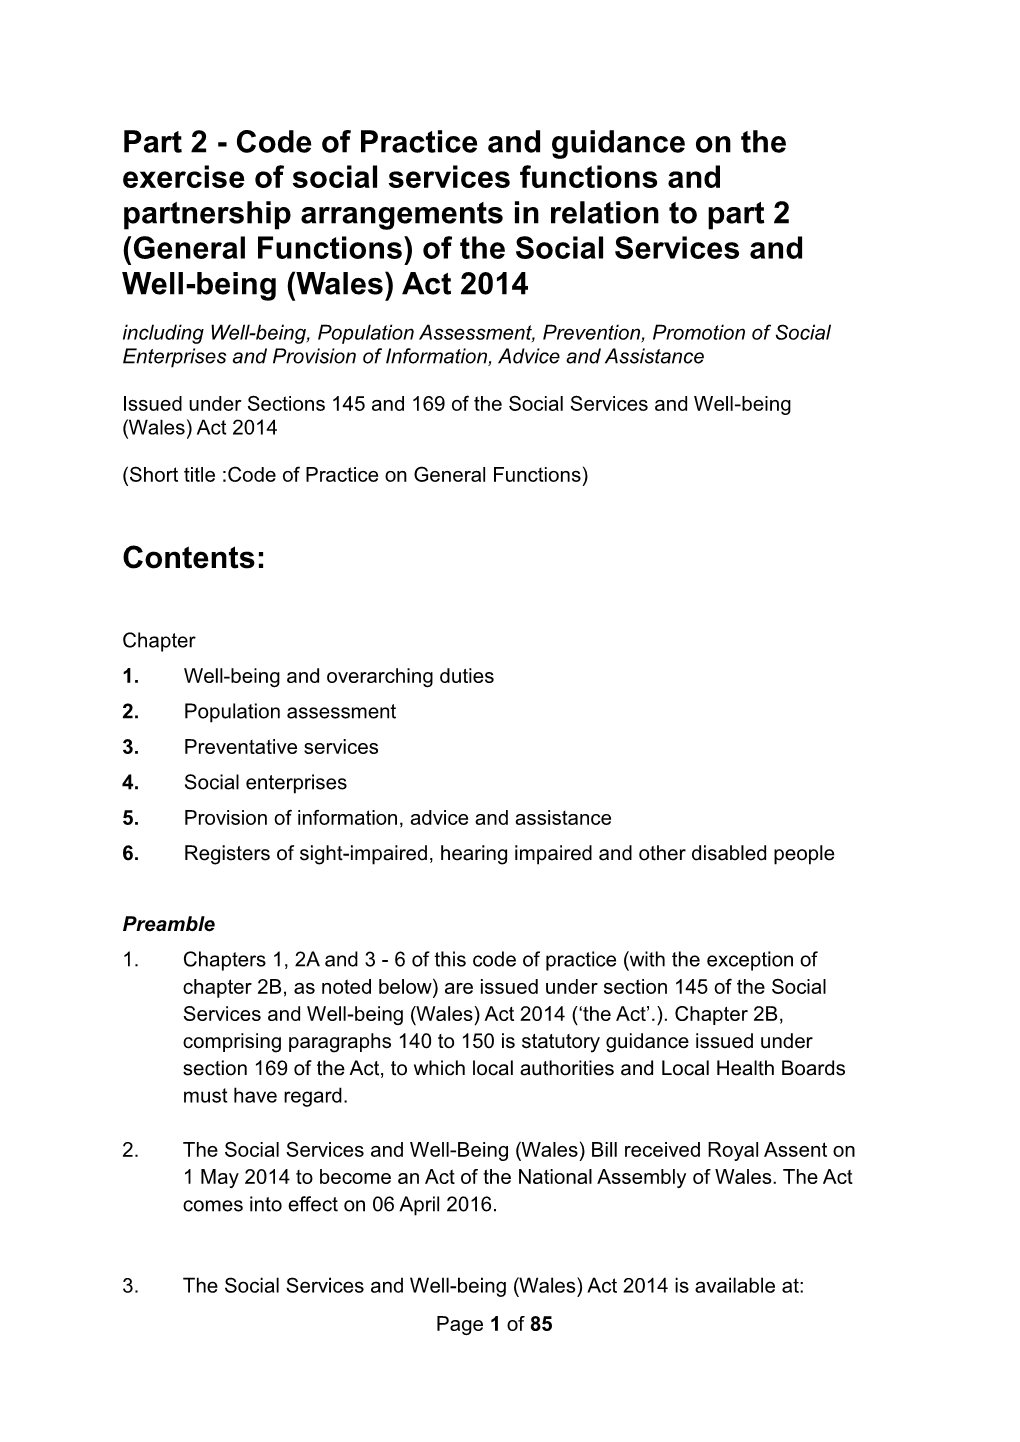 Code of Practice and Guidance on the Exercise of Social Services Functions